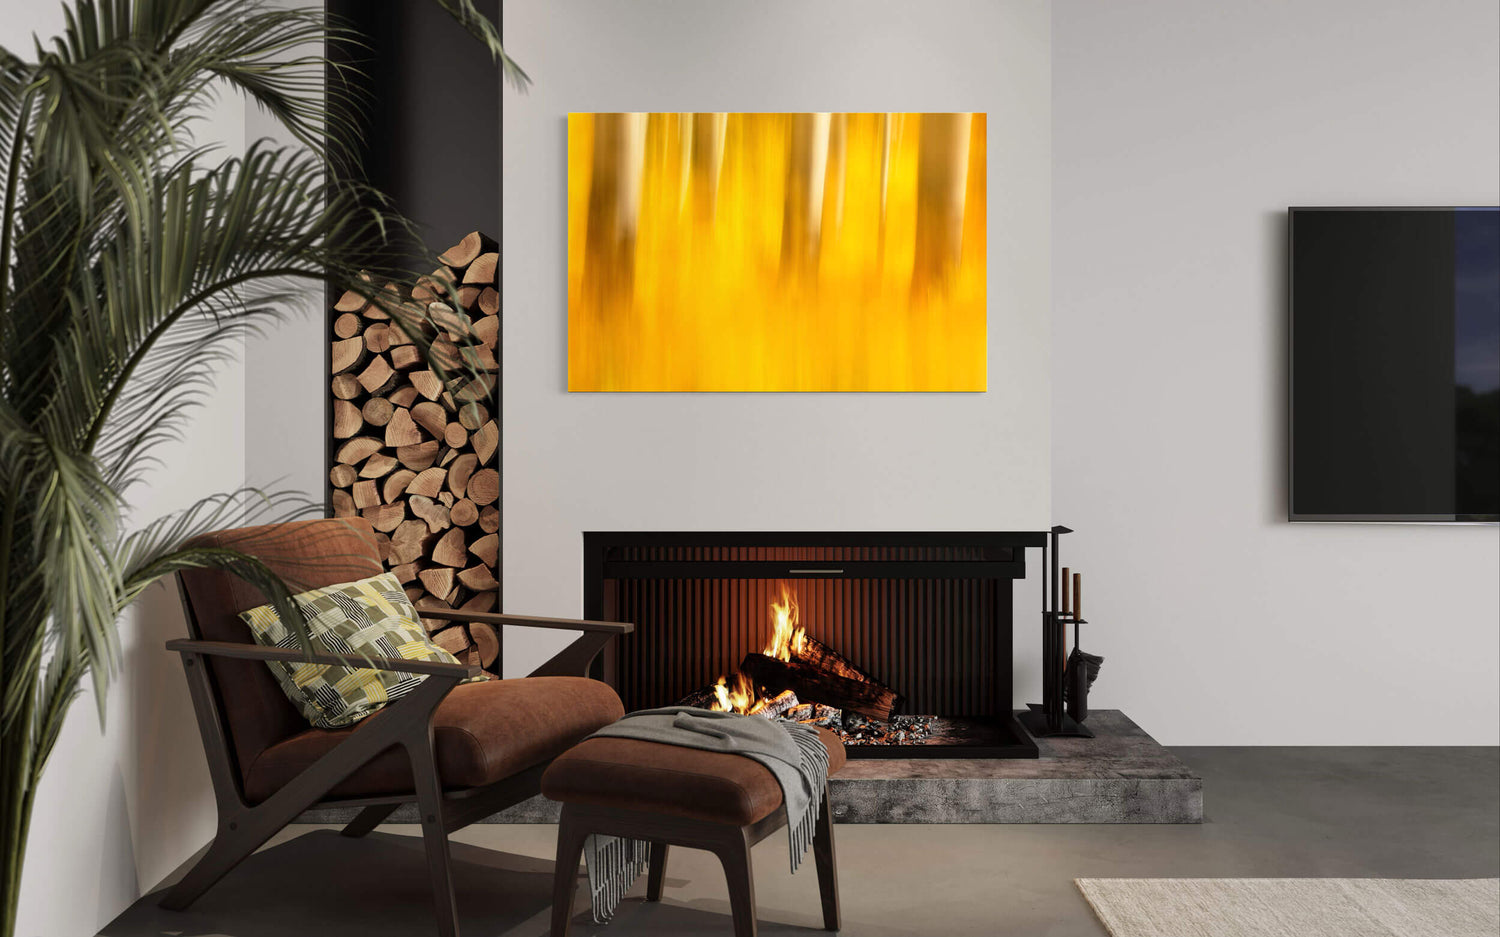 A piece of abstract Telluride art showing the fall colors on Last Dollar Road hangs in a living room.